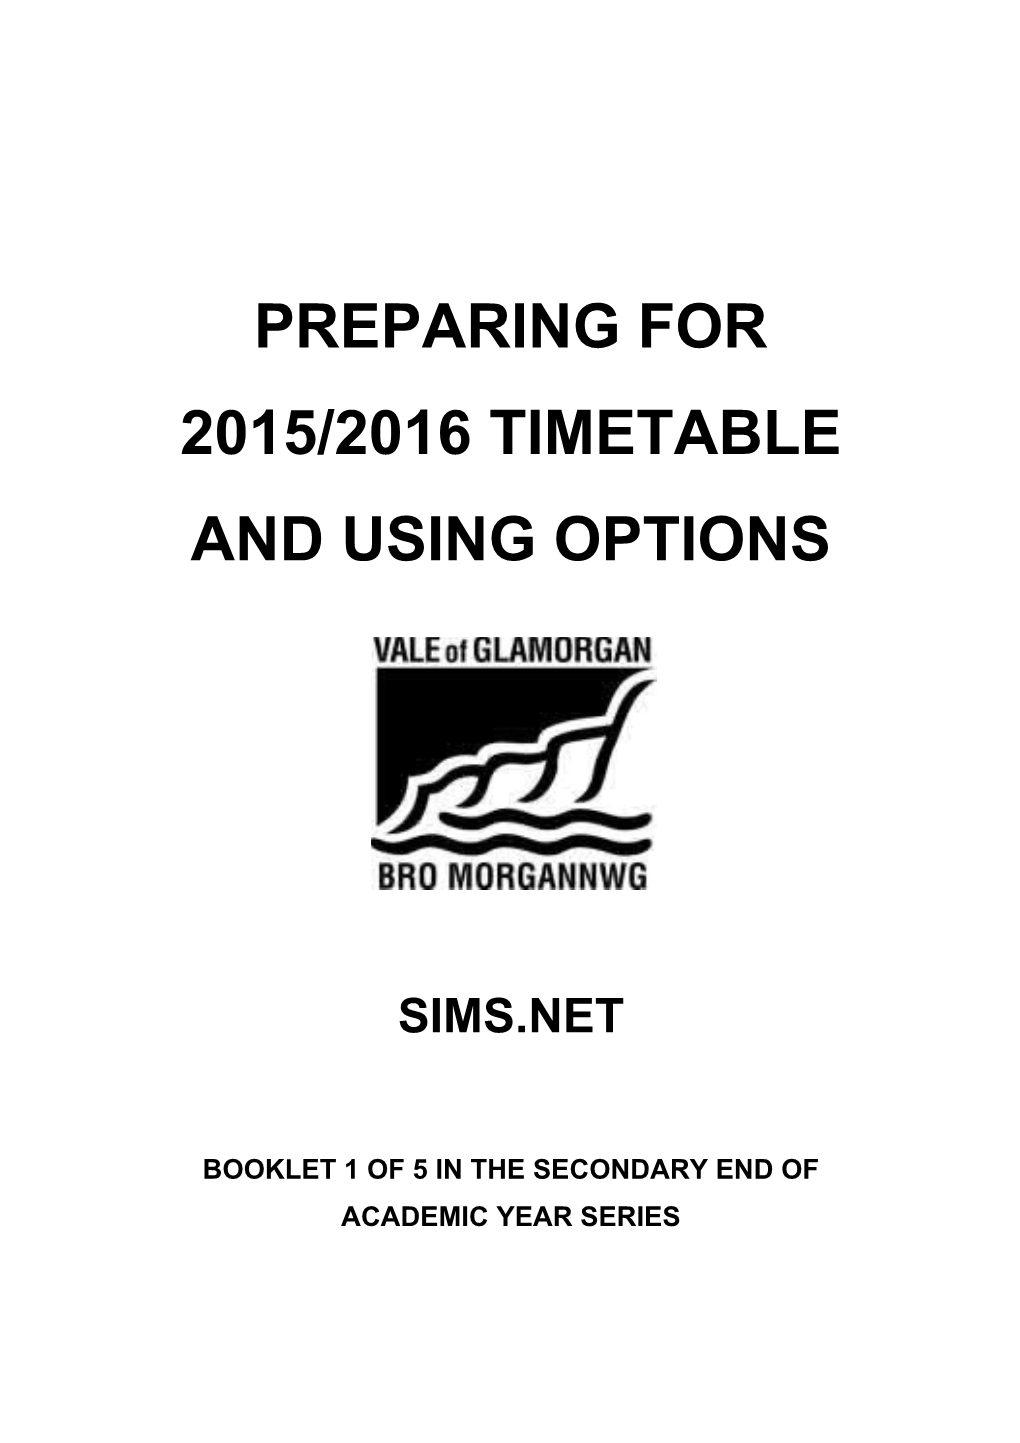 Preparing for 2015/2016 Timetable and Using Options